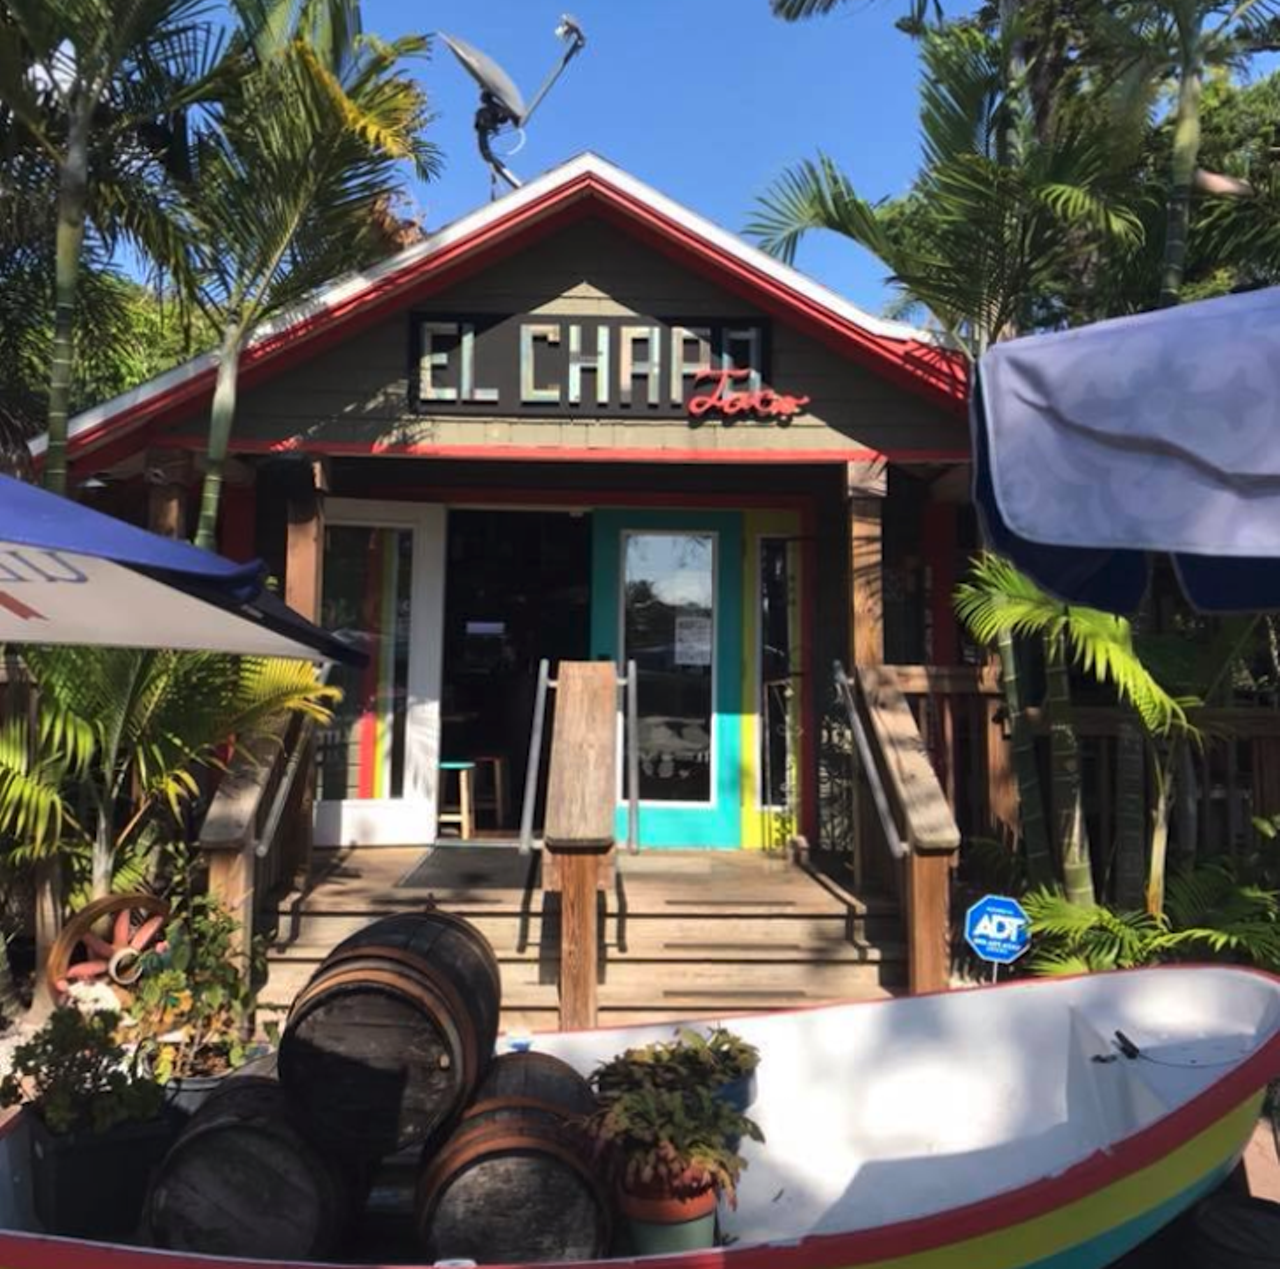 El Chapo  
3038 Beach Blvd S, Gulfport,  727-256-9033
Take a trip to Gulfport to experience what El Chapo is serving up. These tacos need to be as famous as the drug lord the joint is named after.
Photo via El Chapo/Facebook